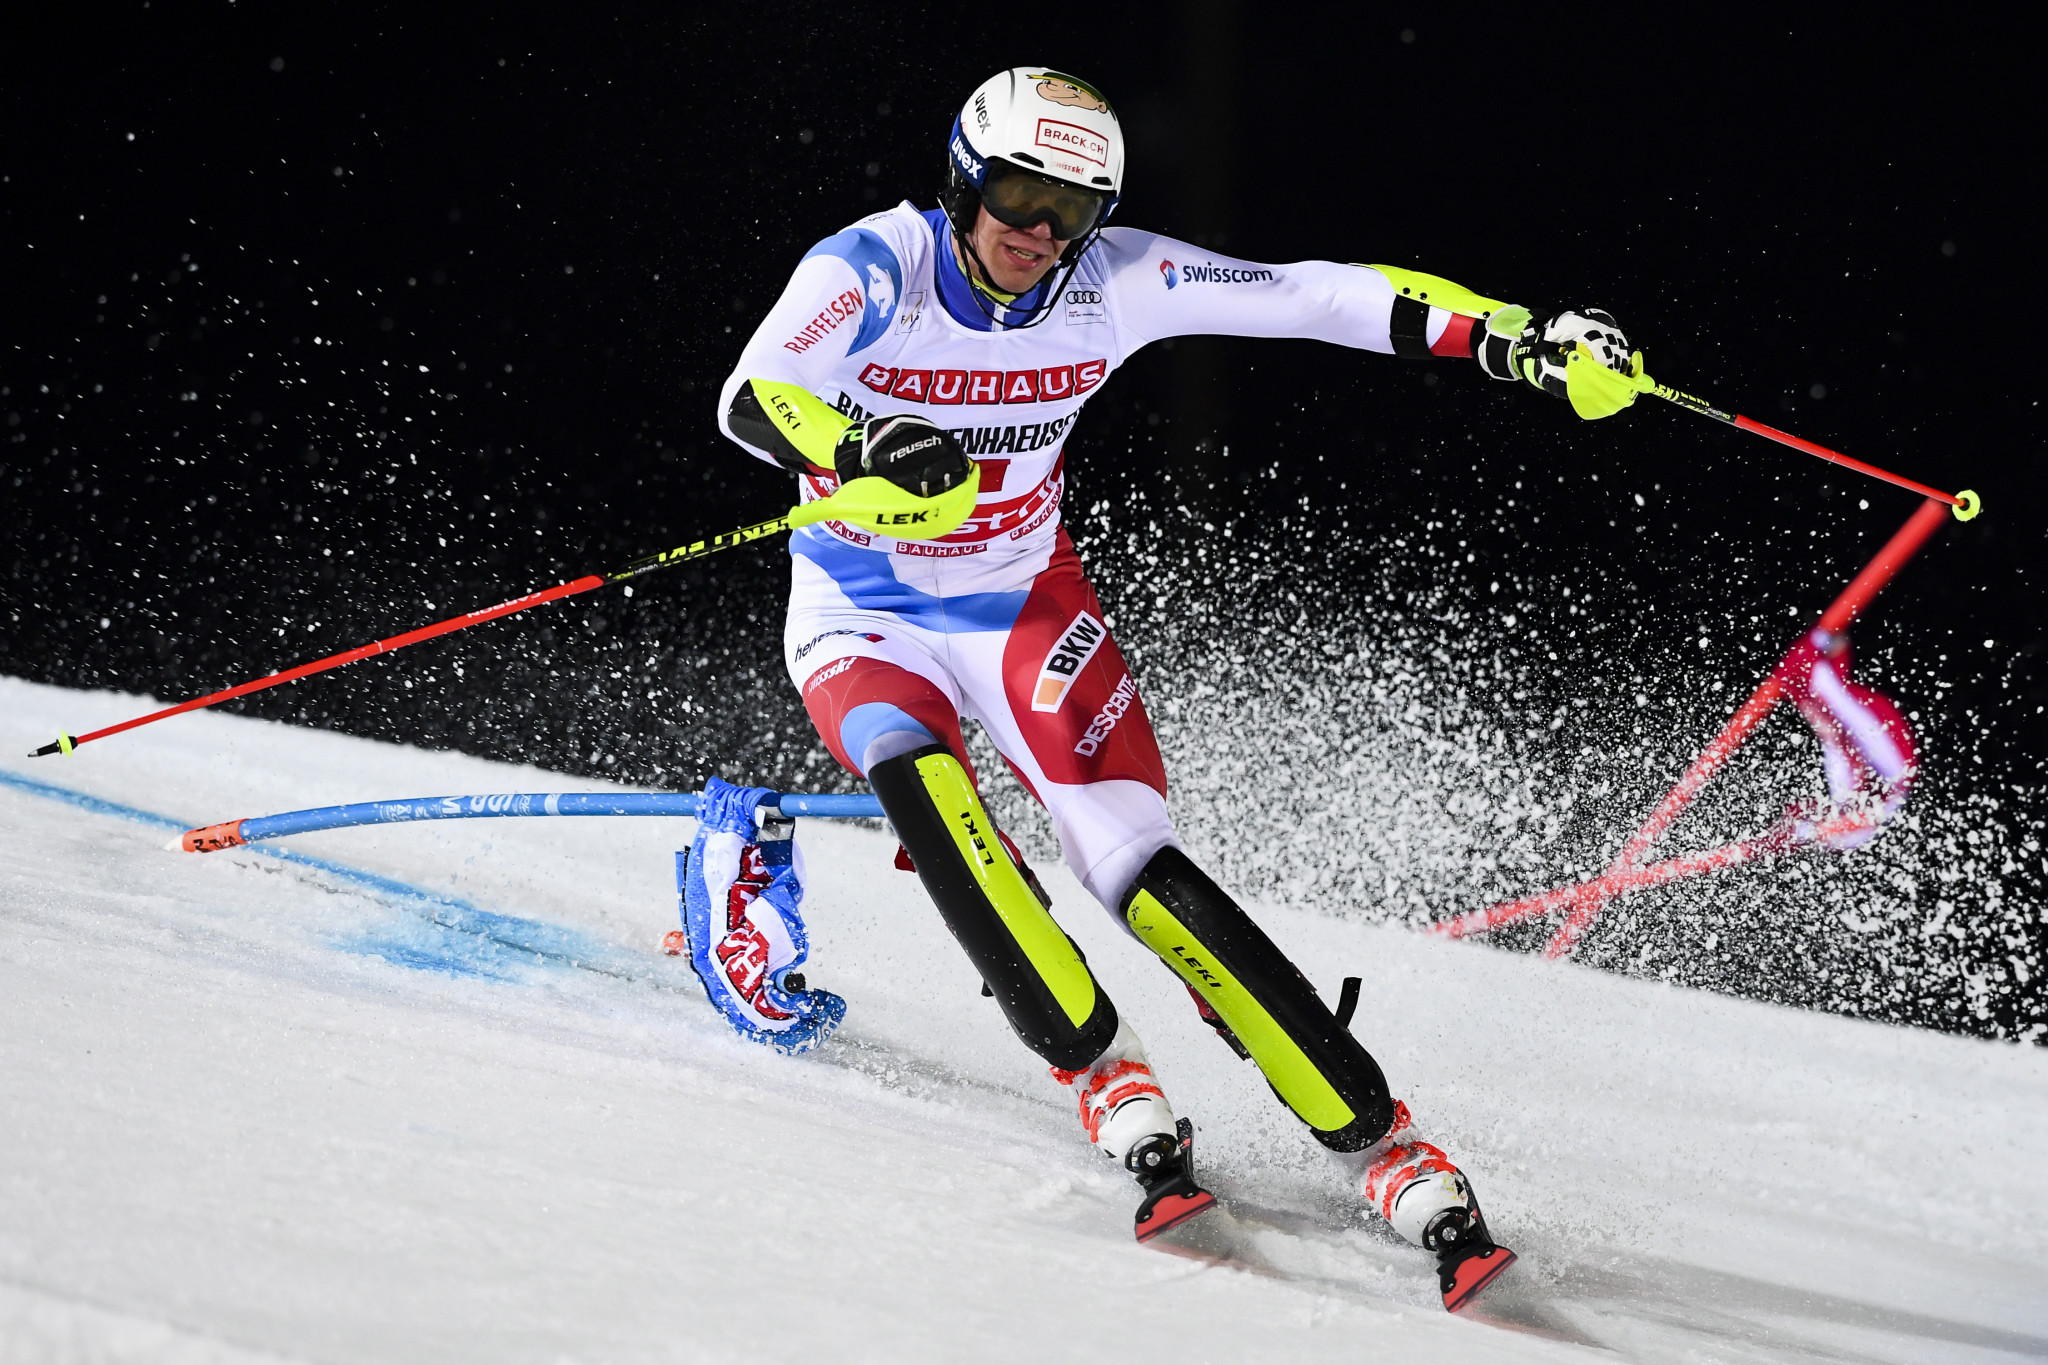 Switzerland's Ramon Zenhaeusern emerged as the winner of the men's competition ©Getty Images